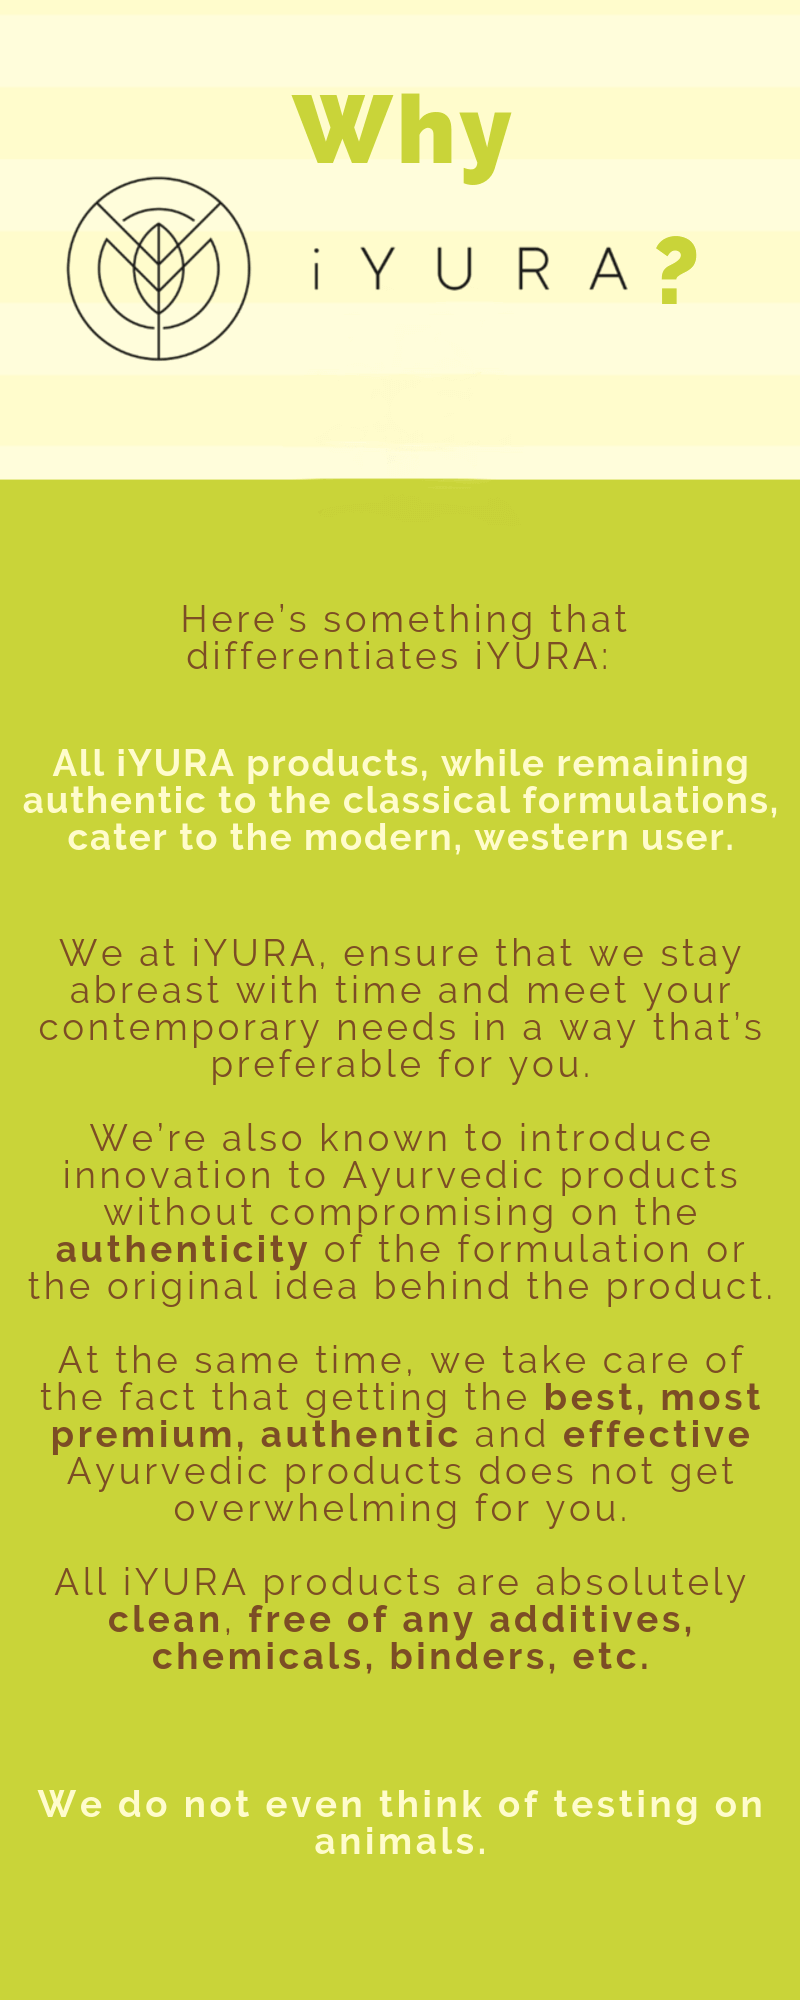 Why use iyura products?